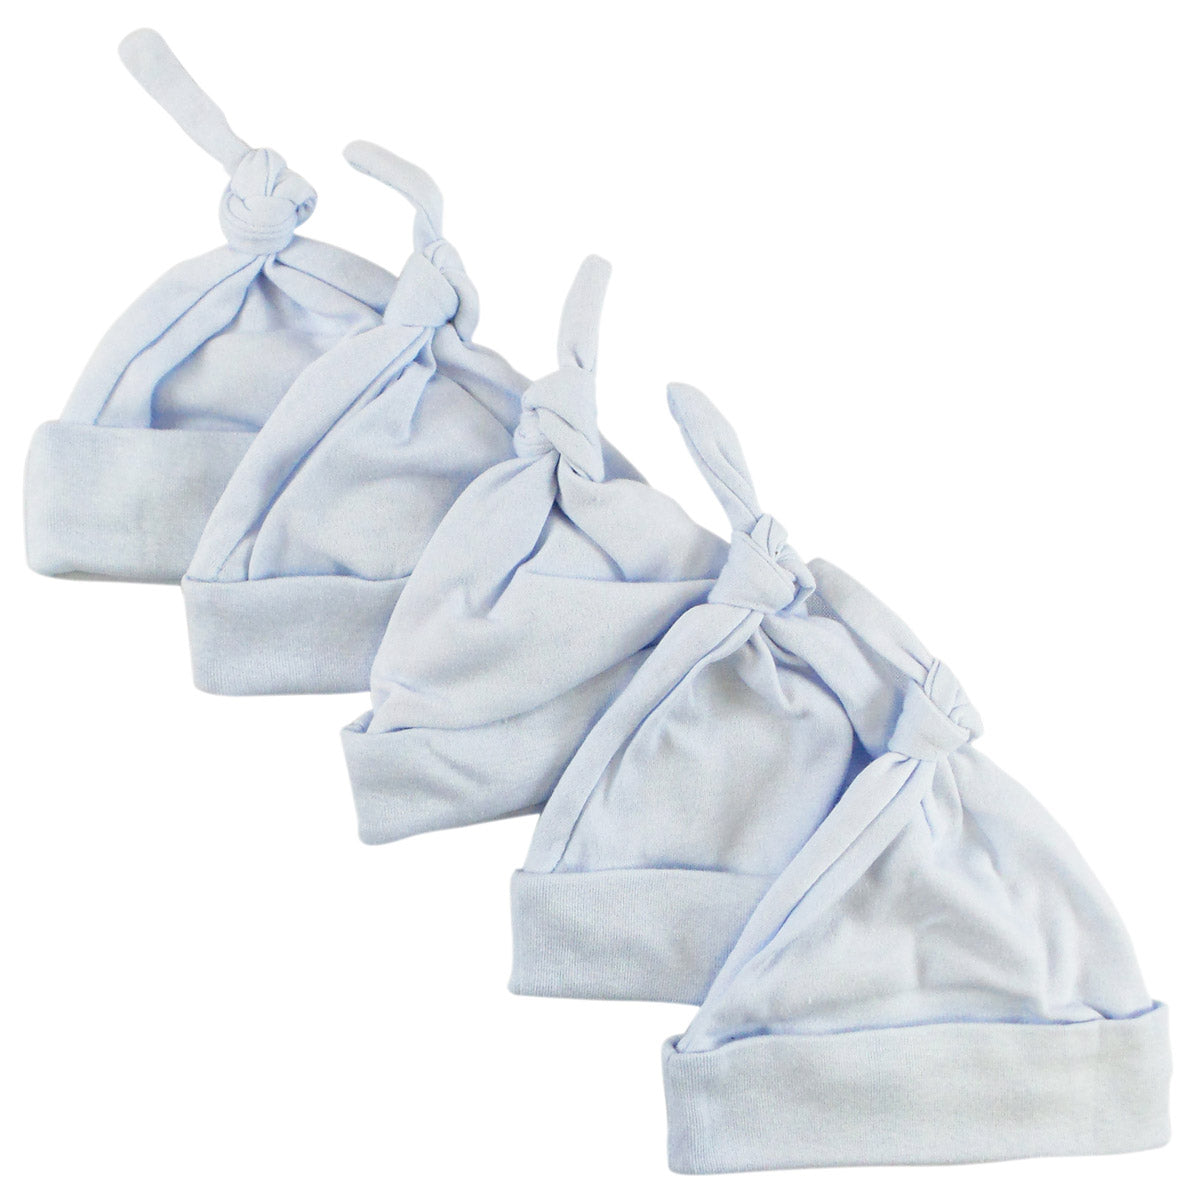 Blue Knotted Baby Cap (Pack of 5) 1100-BLUE-5